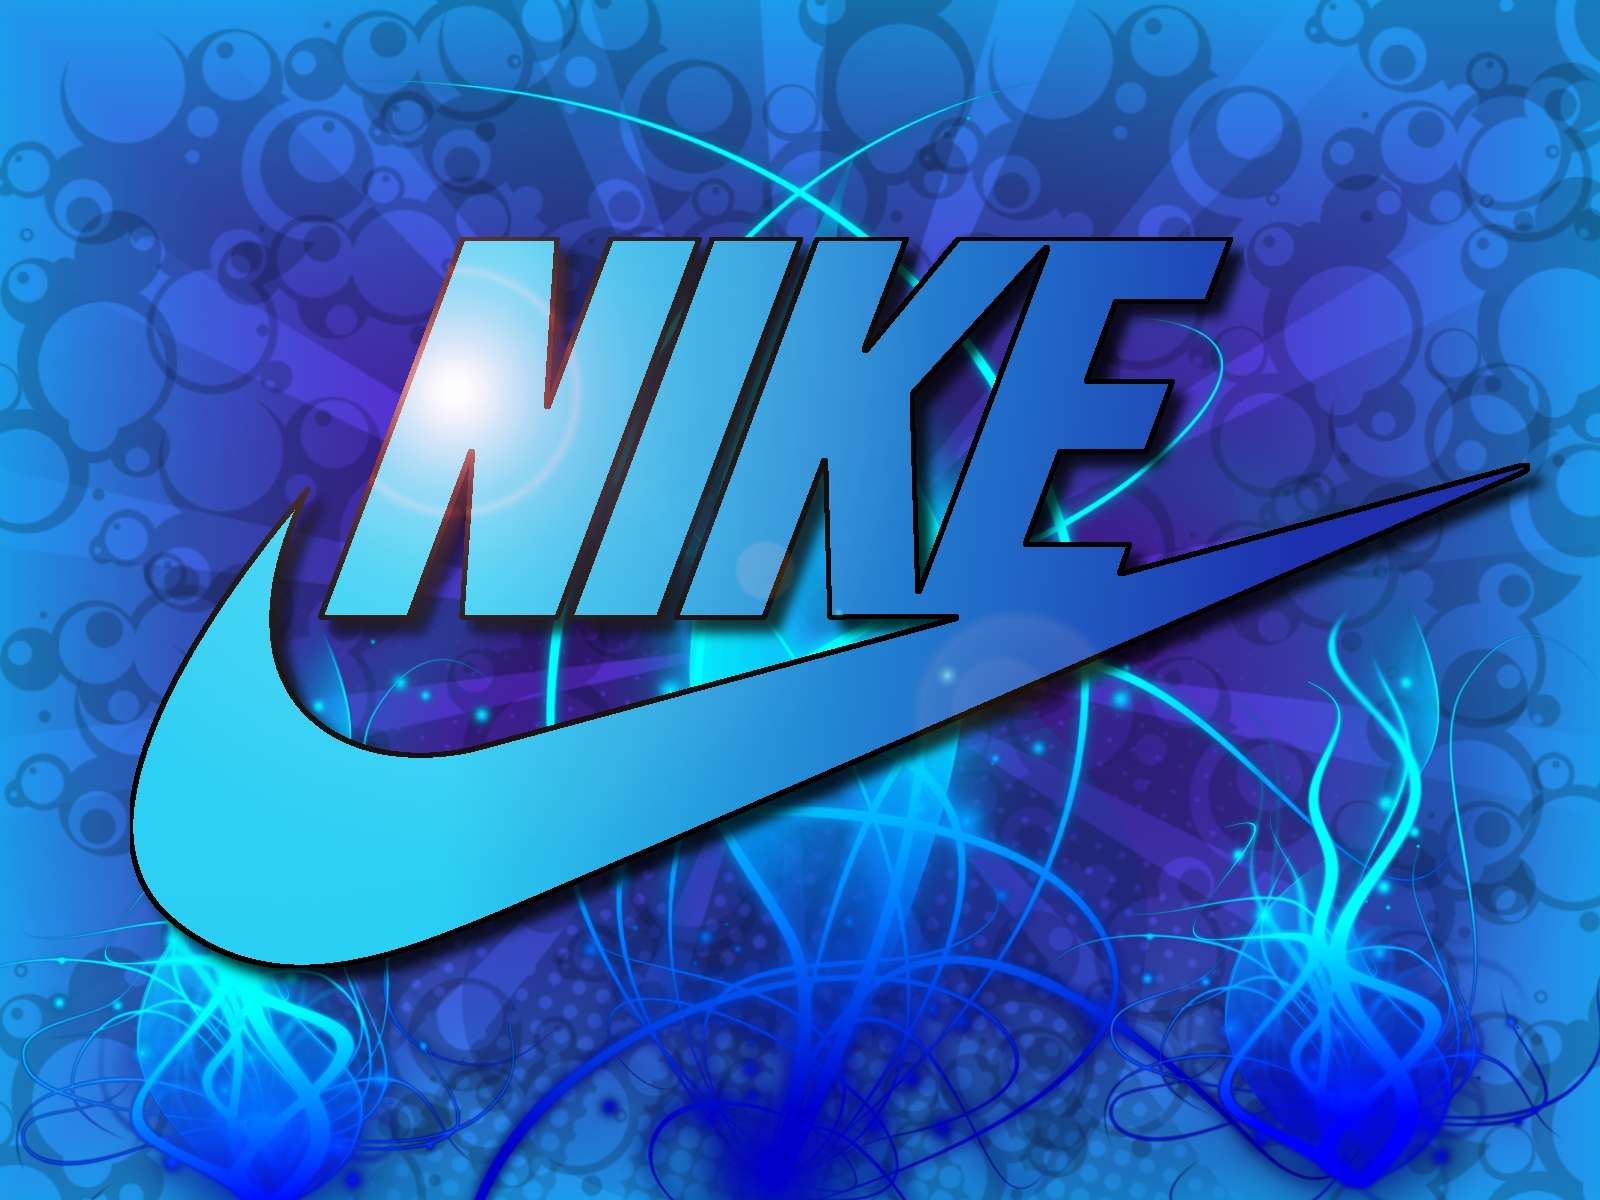 Cool Nike Wallpaper HD Background Download